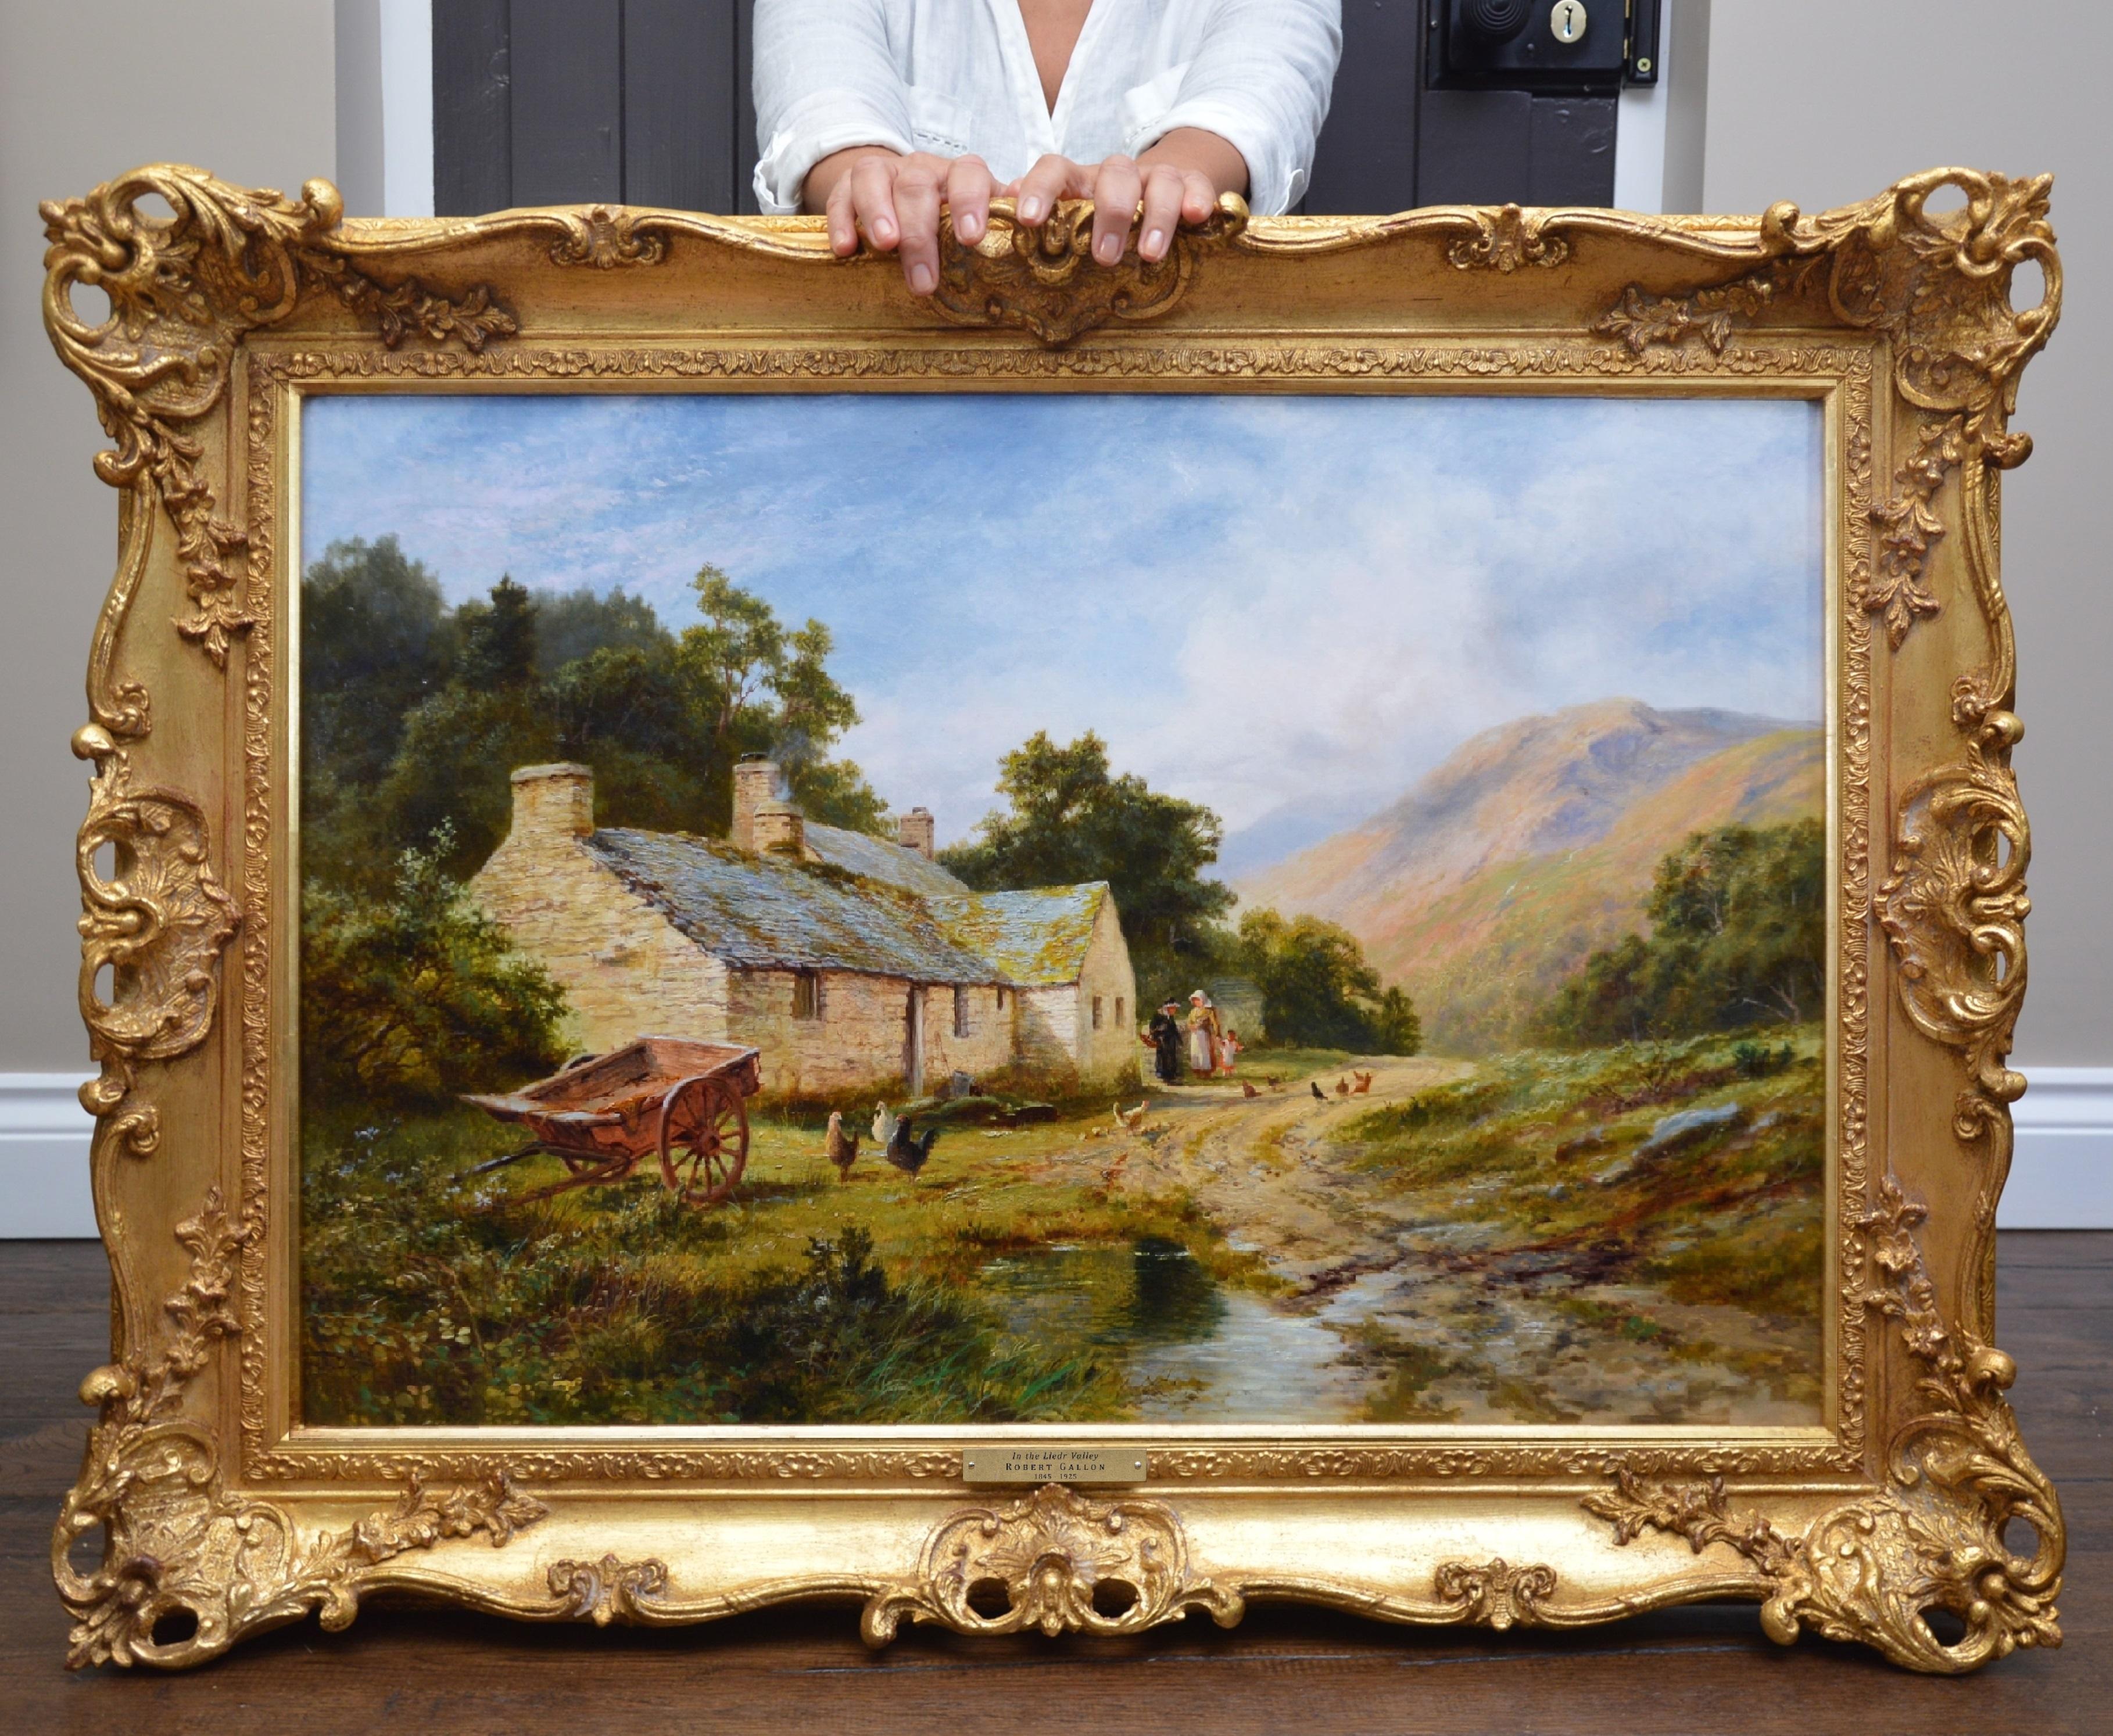 Robert Gallon Animal Painting - The Lledr Valley - 19th Century Summer Landscape Snowdonia Wales Oil Painting